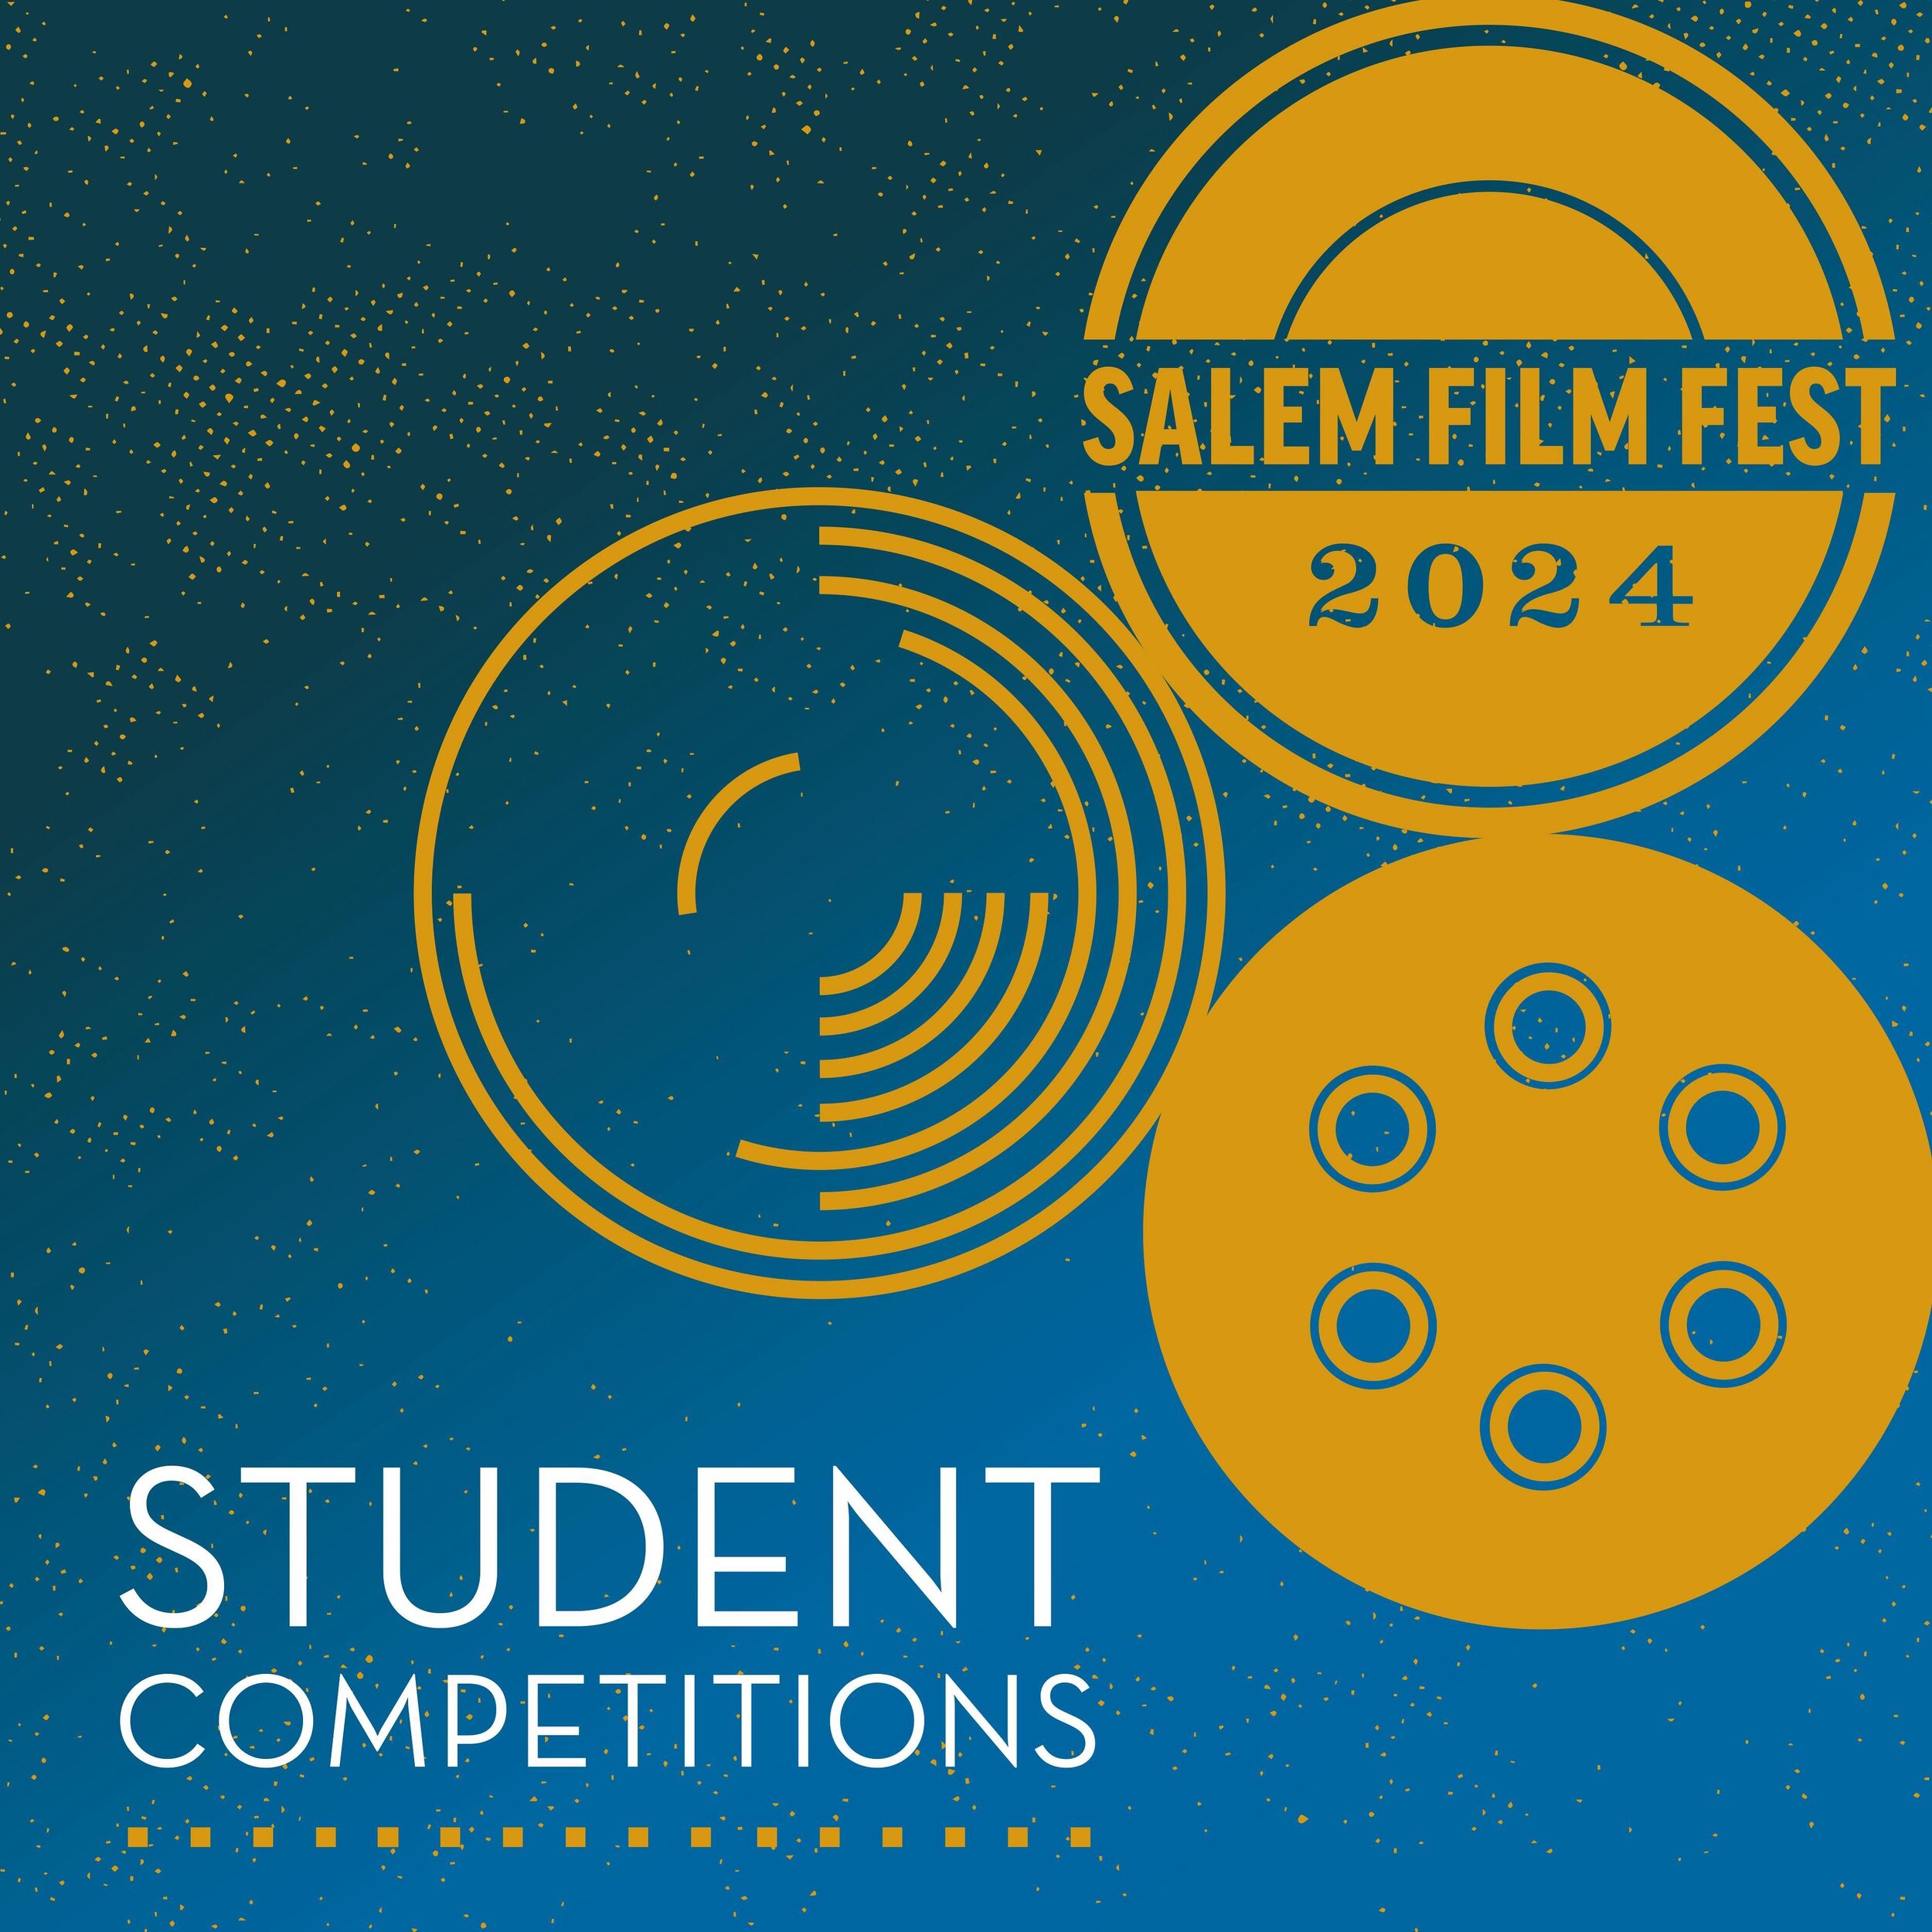 The @_SalemFilmFest kicks off this Thursday March 21 and runs through Sunday. Check out the terrific lineup of documentary film screenings and events!

MPC is proud to support the Mass Reality Check student film program on Saturday.